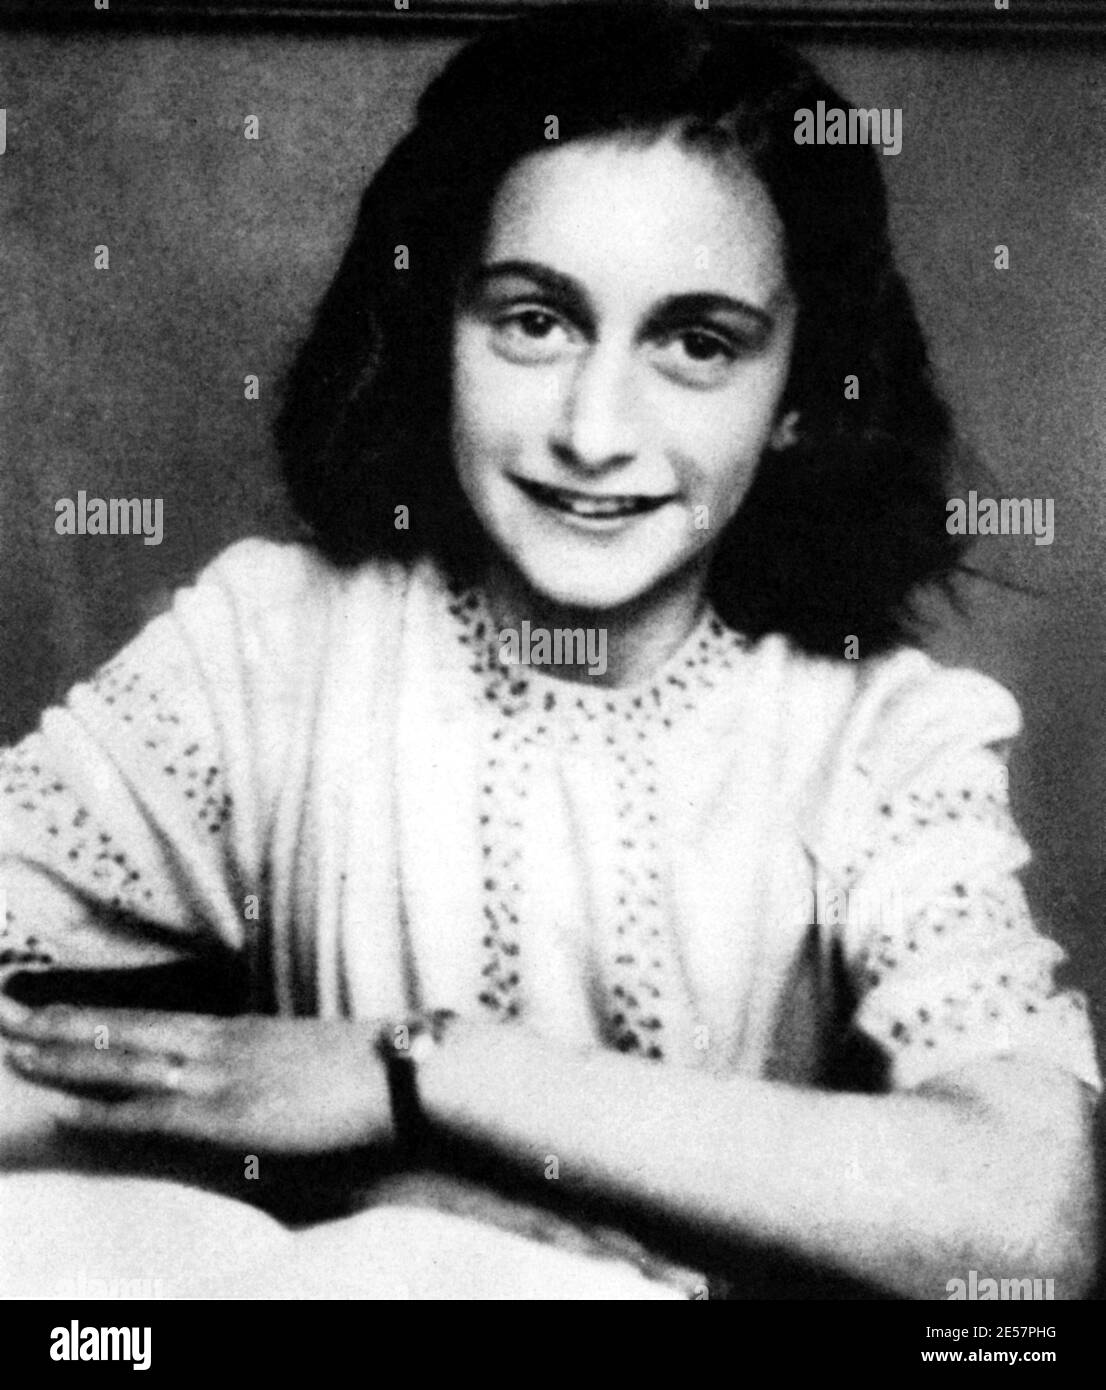 1941 , december :  The young 12 year's old german jewish writer   ANNE  FRANK  ( 1929 - 1945 ) at school , author of the ' Diary ' pubblished in 1946 in over the world . This photo as one of the last pictures taken to Anne Frank , the following summer , as Nazi oppression grew worse , the Franks went into hiding   - ANNA FRANK - portrait - ritratto - scrittrice - scrittore - Diario - diarist - diarista - memorialist - memorialista - LETTERATURA - LITERATURE - scrittrice - letterato  - personality young  child baby - personalità da bambini - da giovani - WWII - seconda guerra mondiale - ebraism Stock Photo